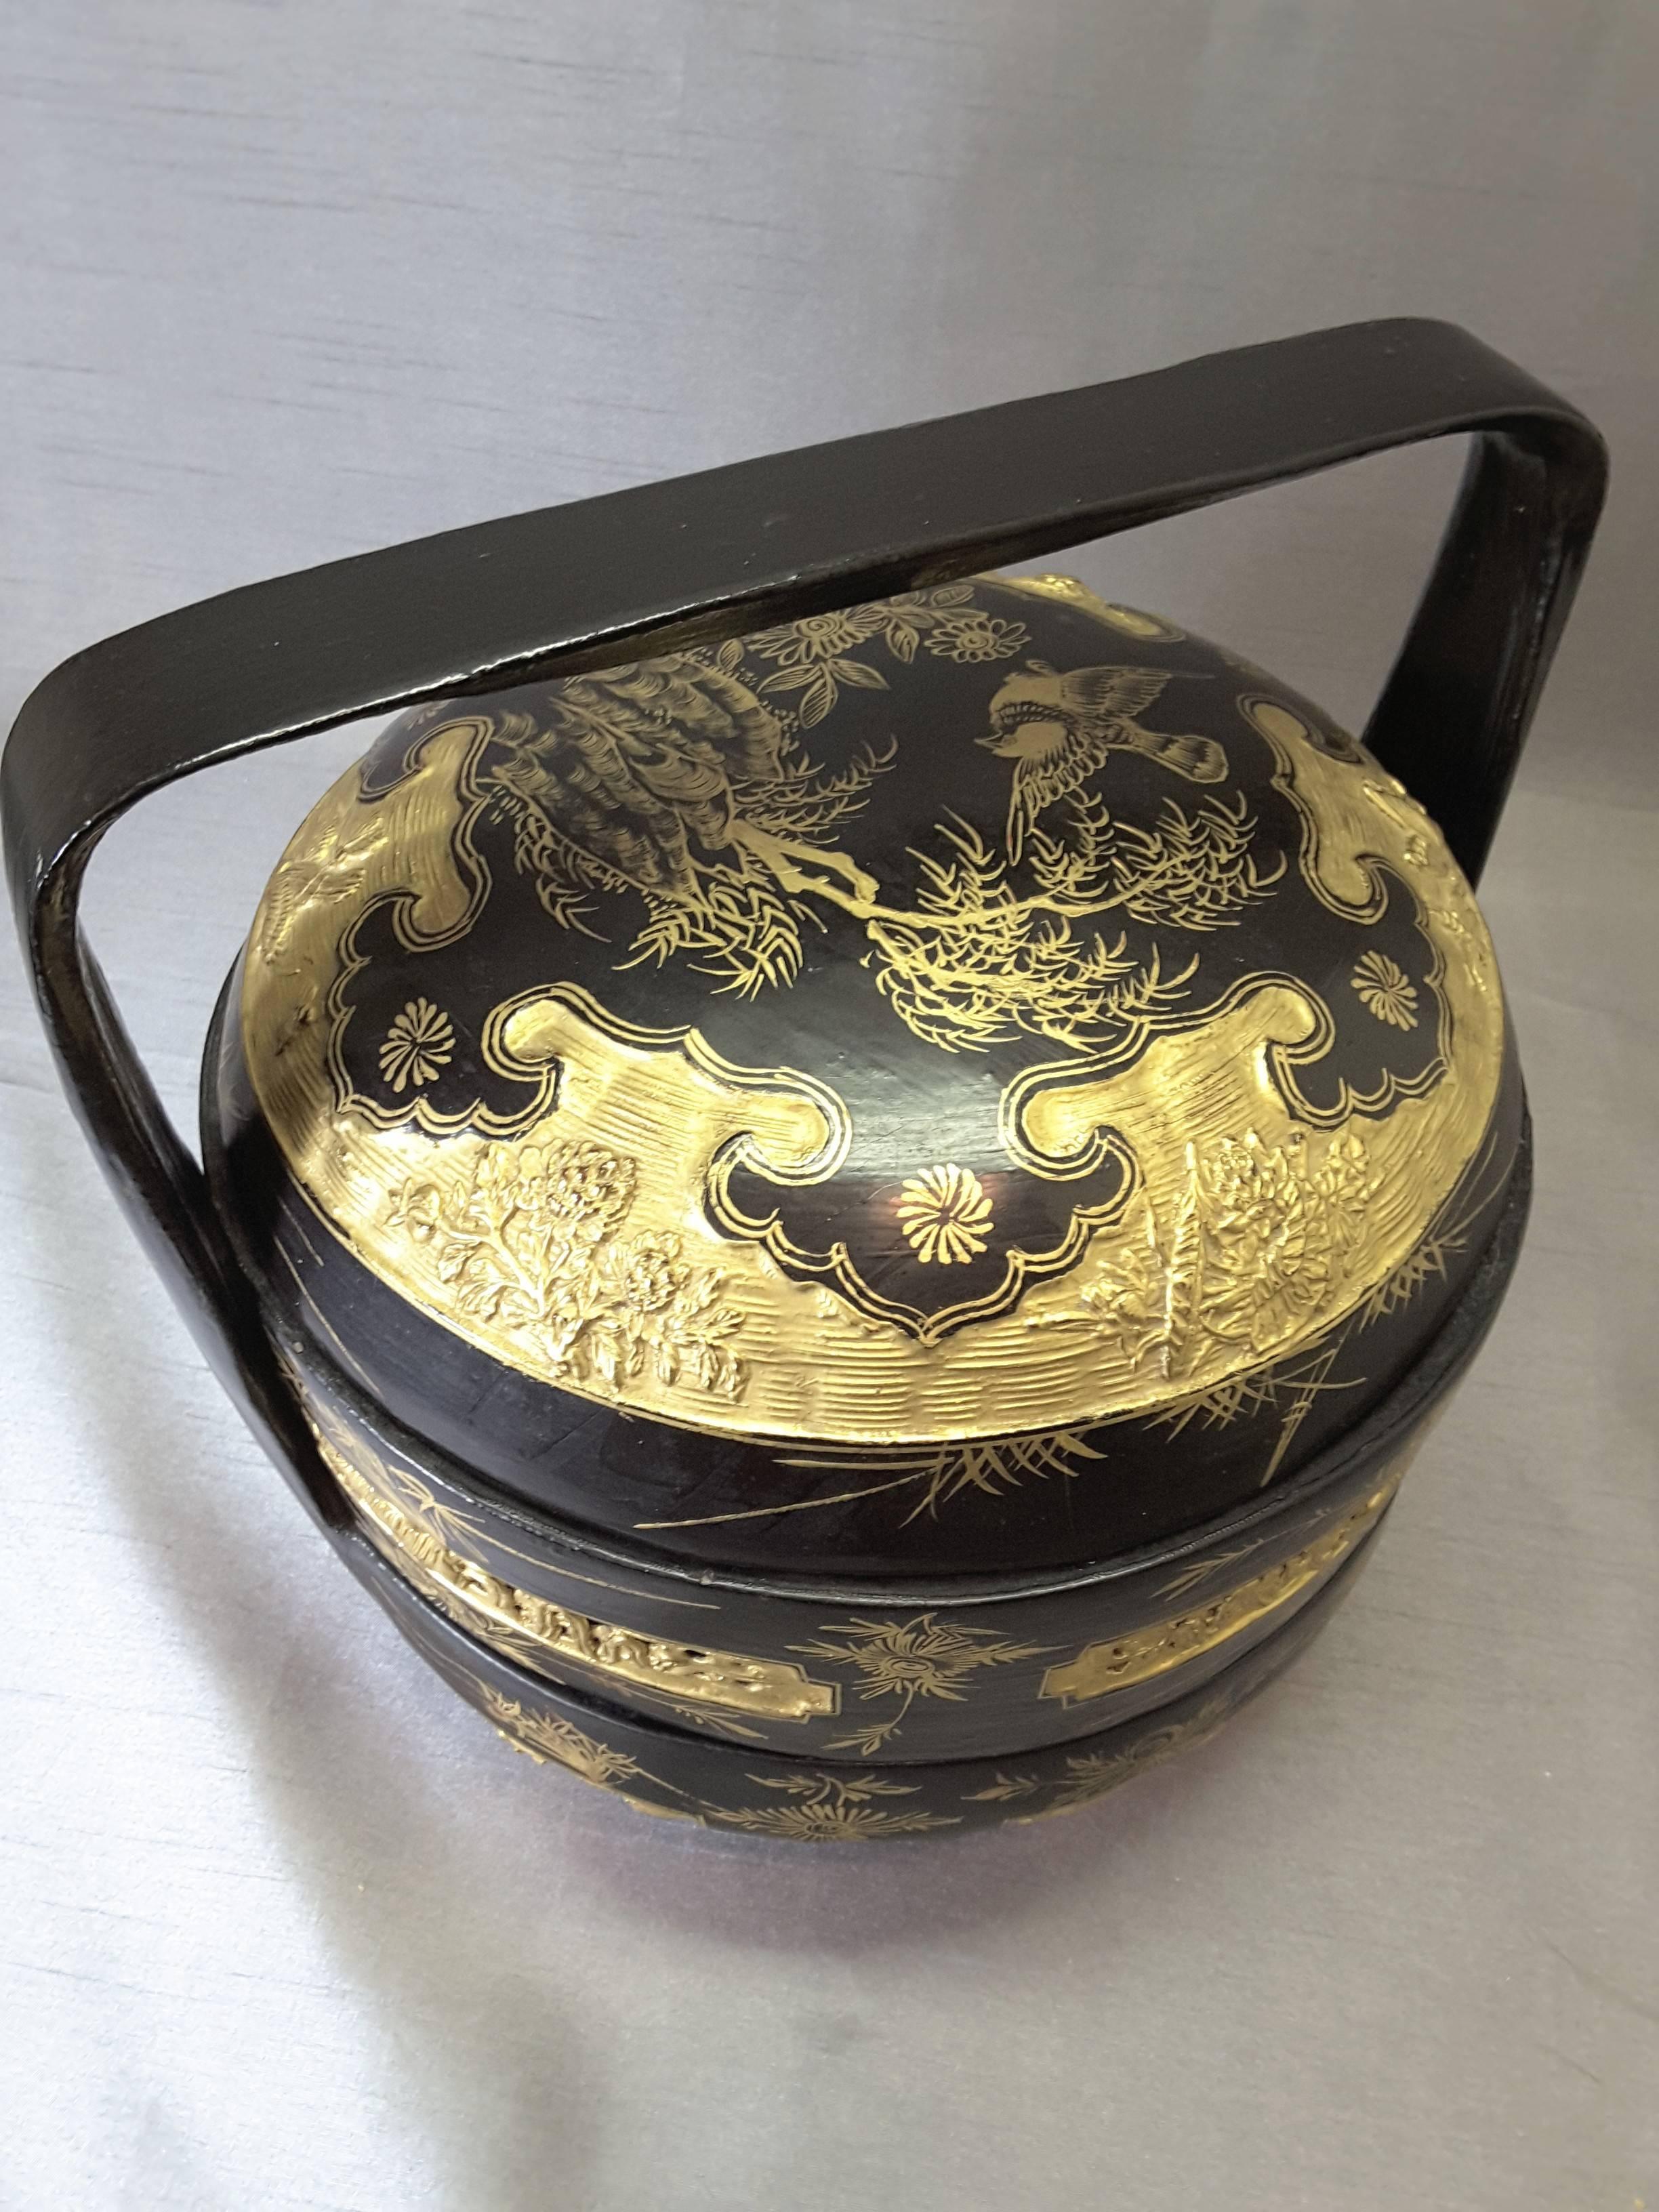 Chinese black lacquered and gilt food carrier/storage box, the box has a base with a center removable tray and lid. The handle is fixed to the base and is decorated with birds and floral motifs. The lid is done in the same manner and has a raised